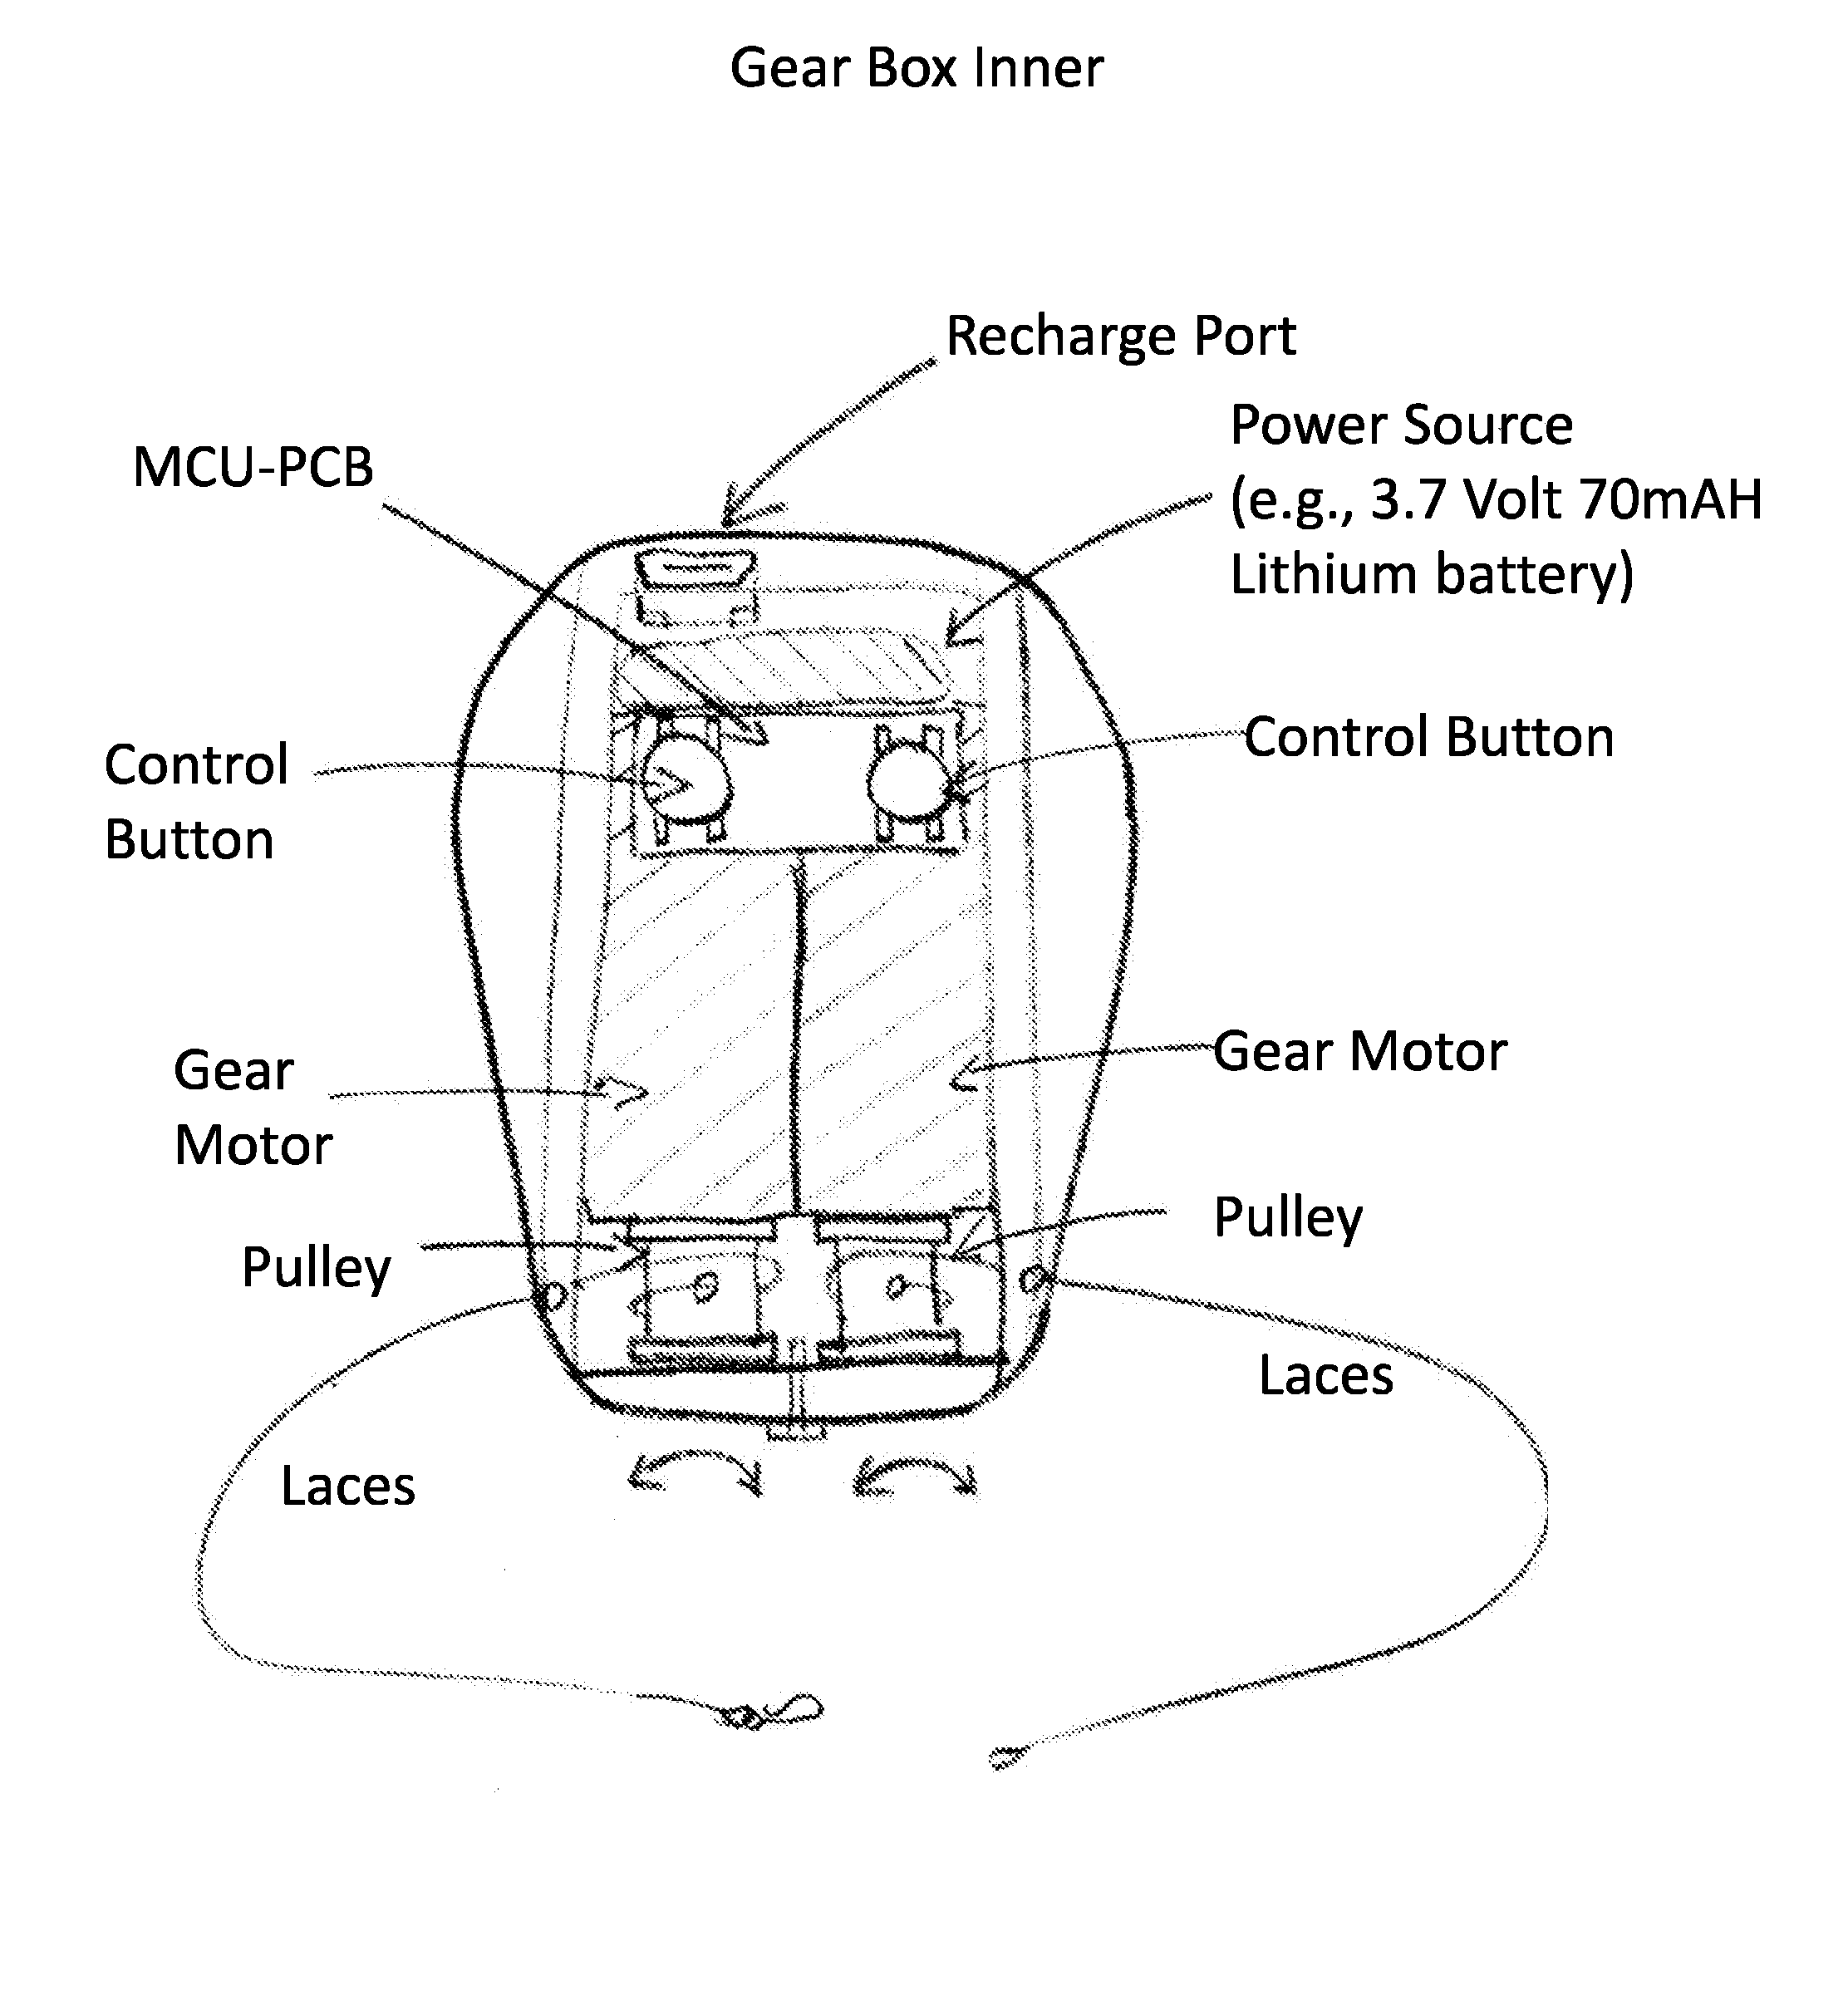 Device for automatically tightening and loosening shoe laces